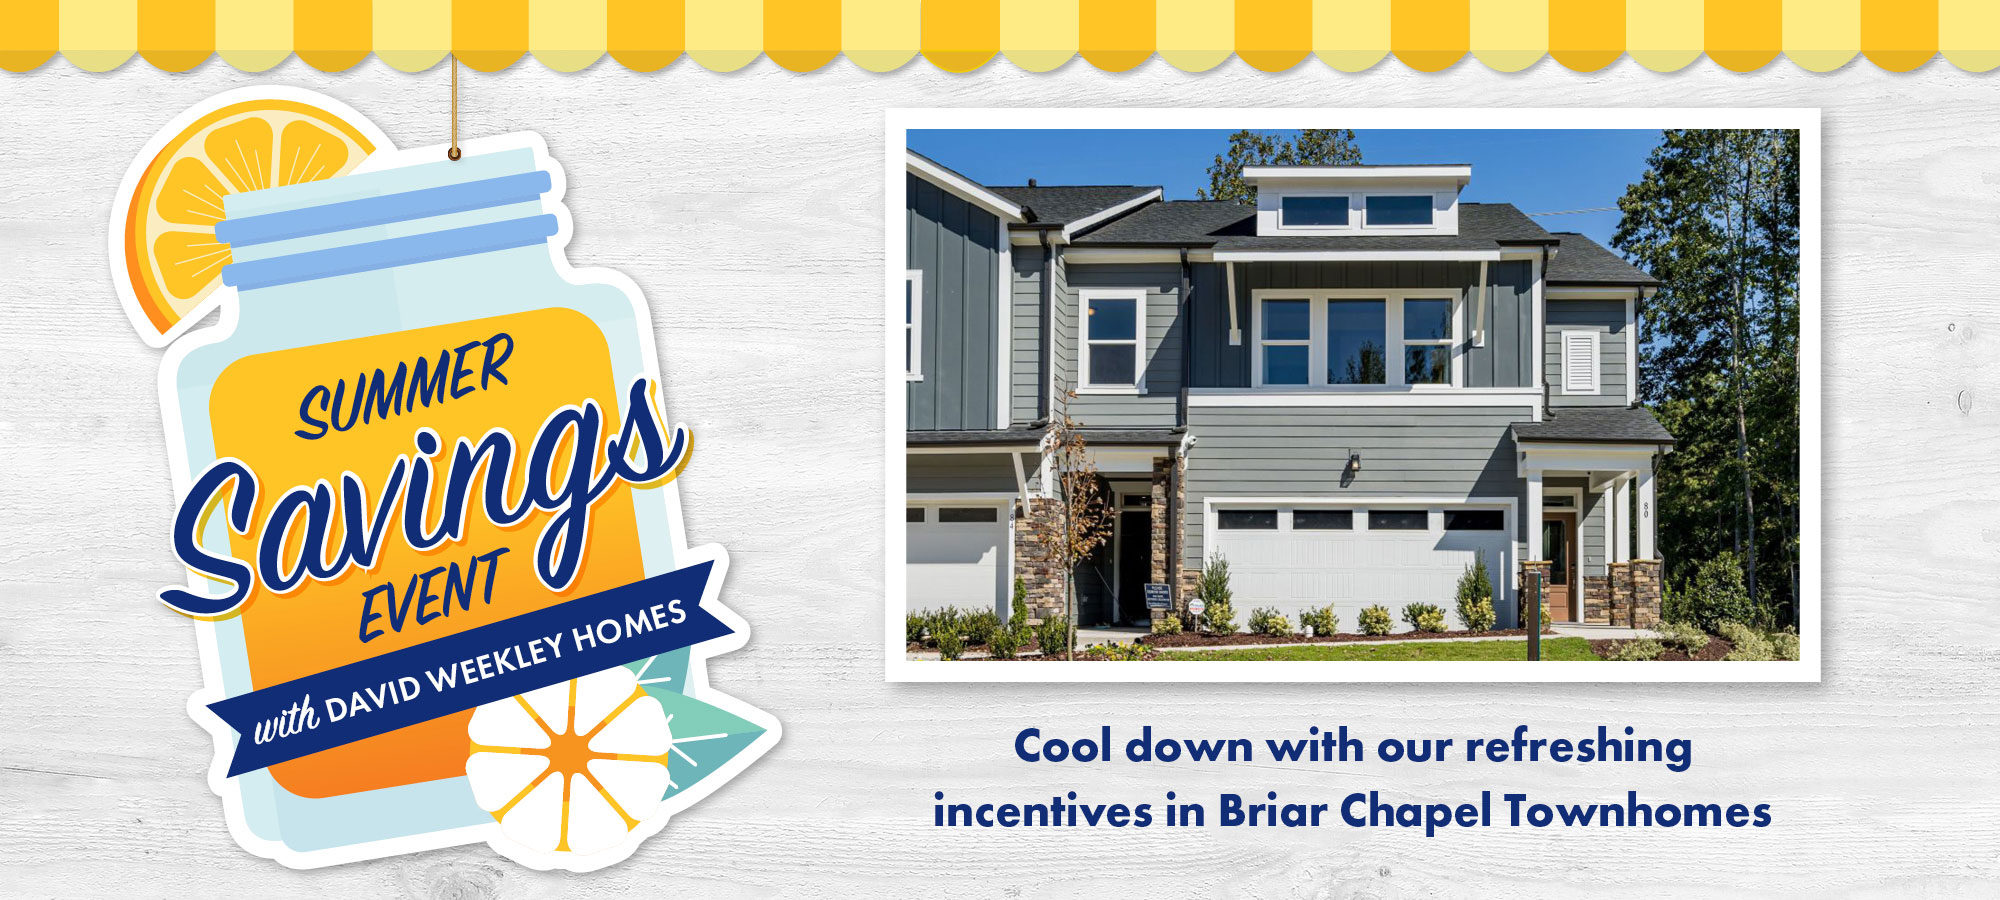 Summer Savings Event in Briar Chapel Townhomes